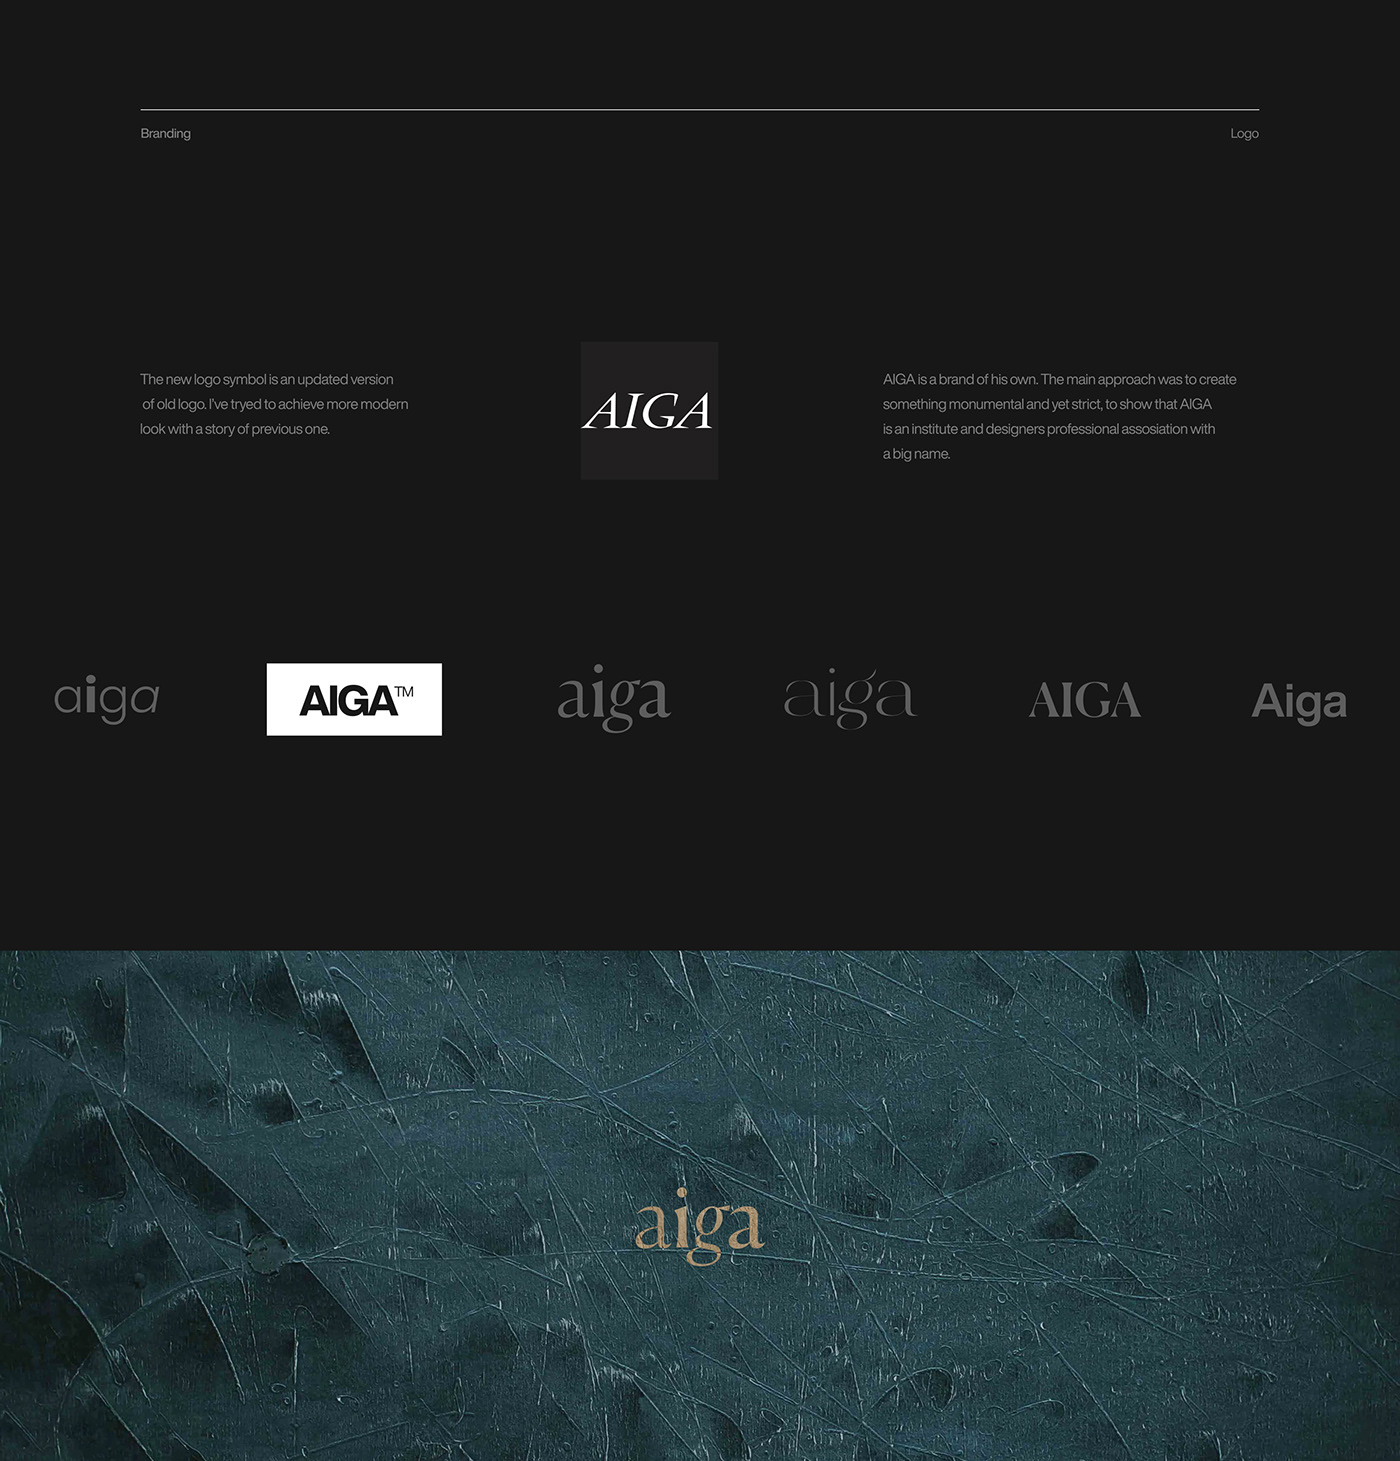 animation  Behance branding  conference interaction motion redesign UI ux Website